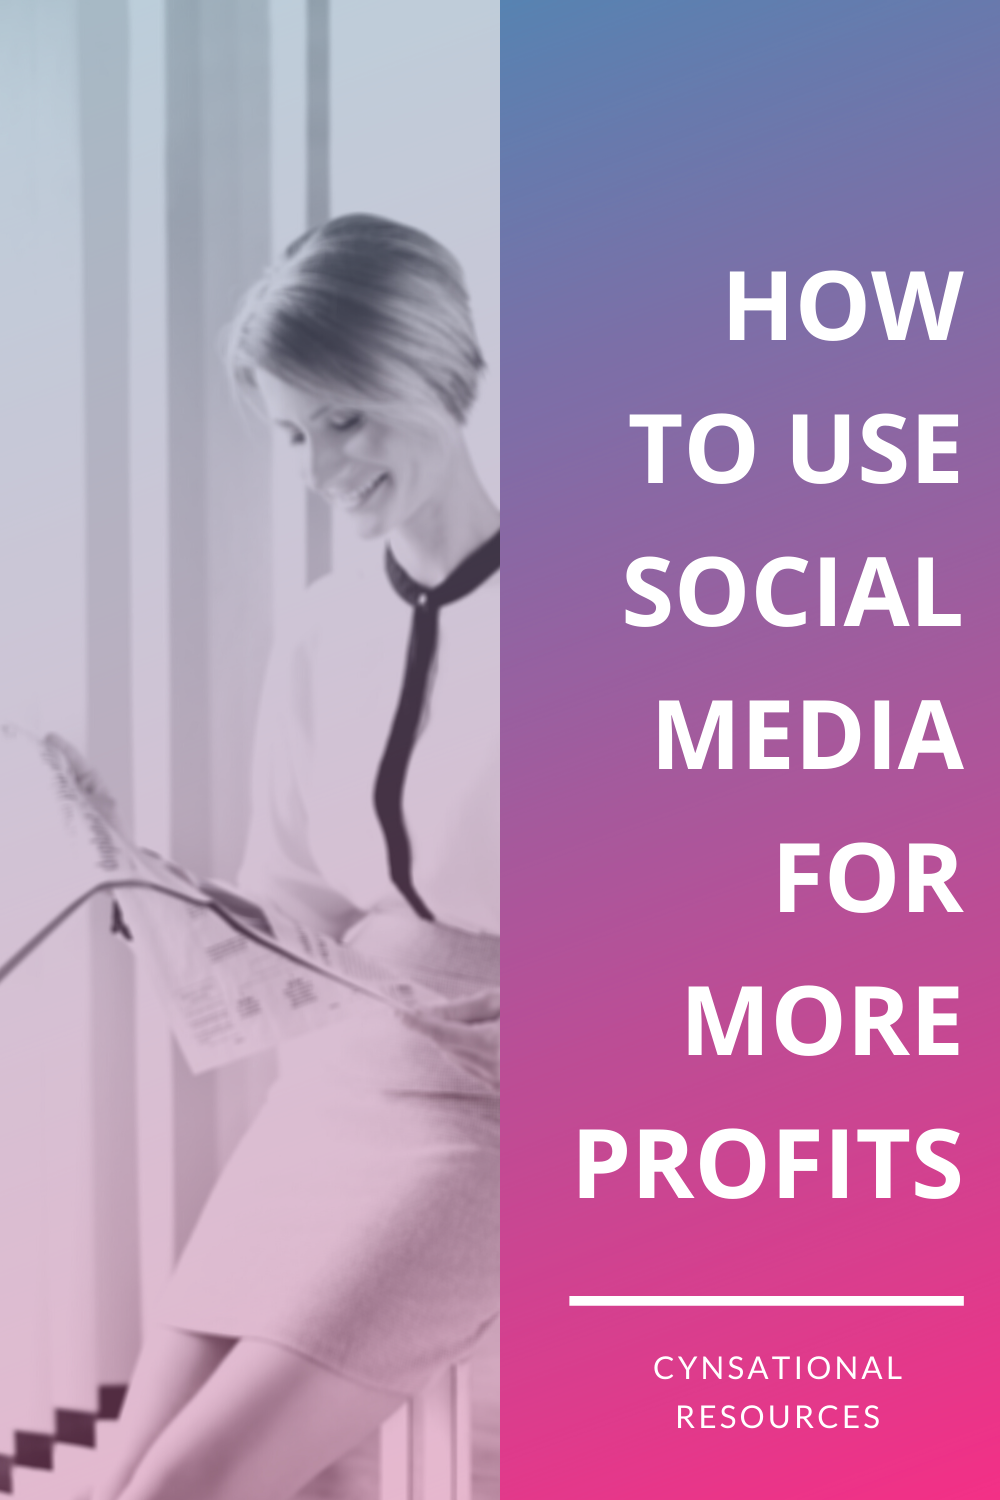 How to Increase Profit from Social Media